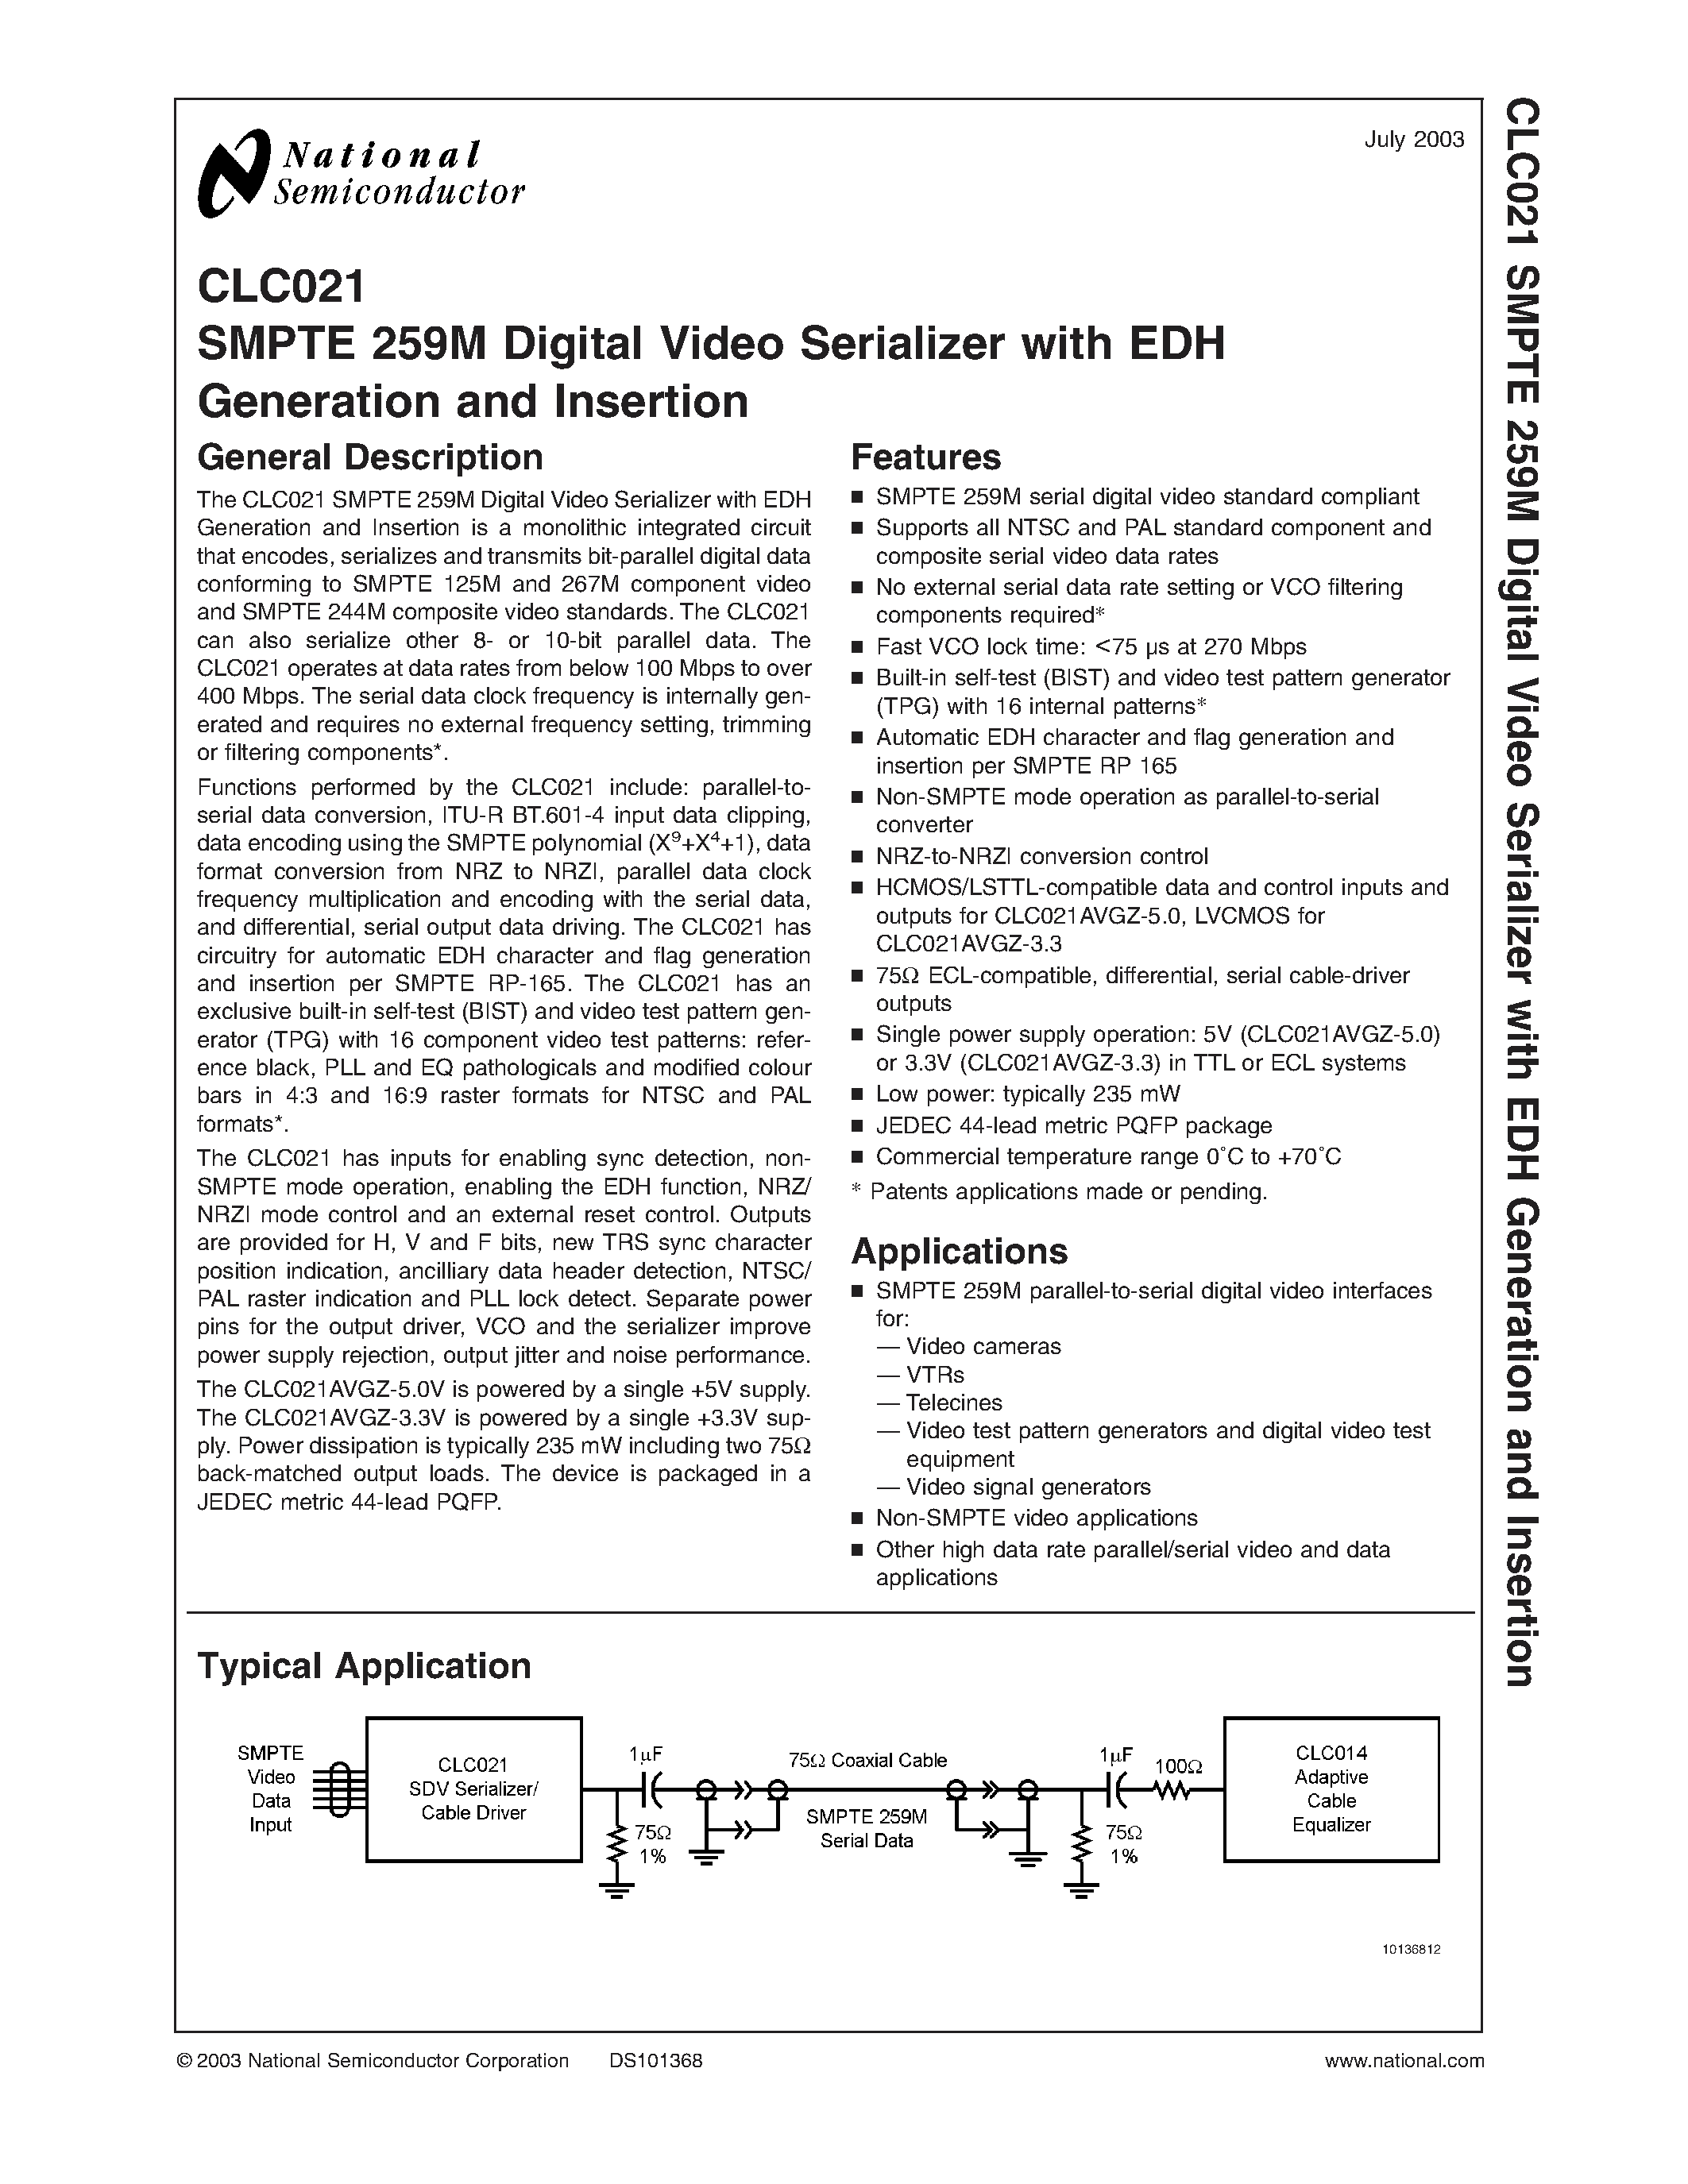 Datasheet CLC021AVGZ-5.0 - SMPTE 259M Digital Video Serializer with EDH Generation and Insertion page 1